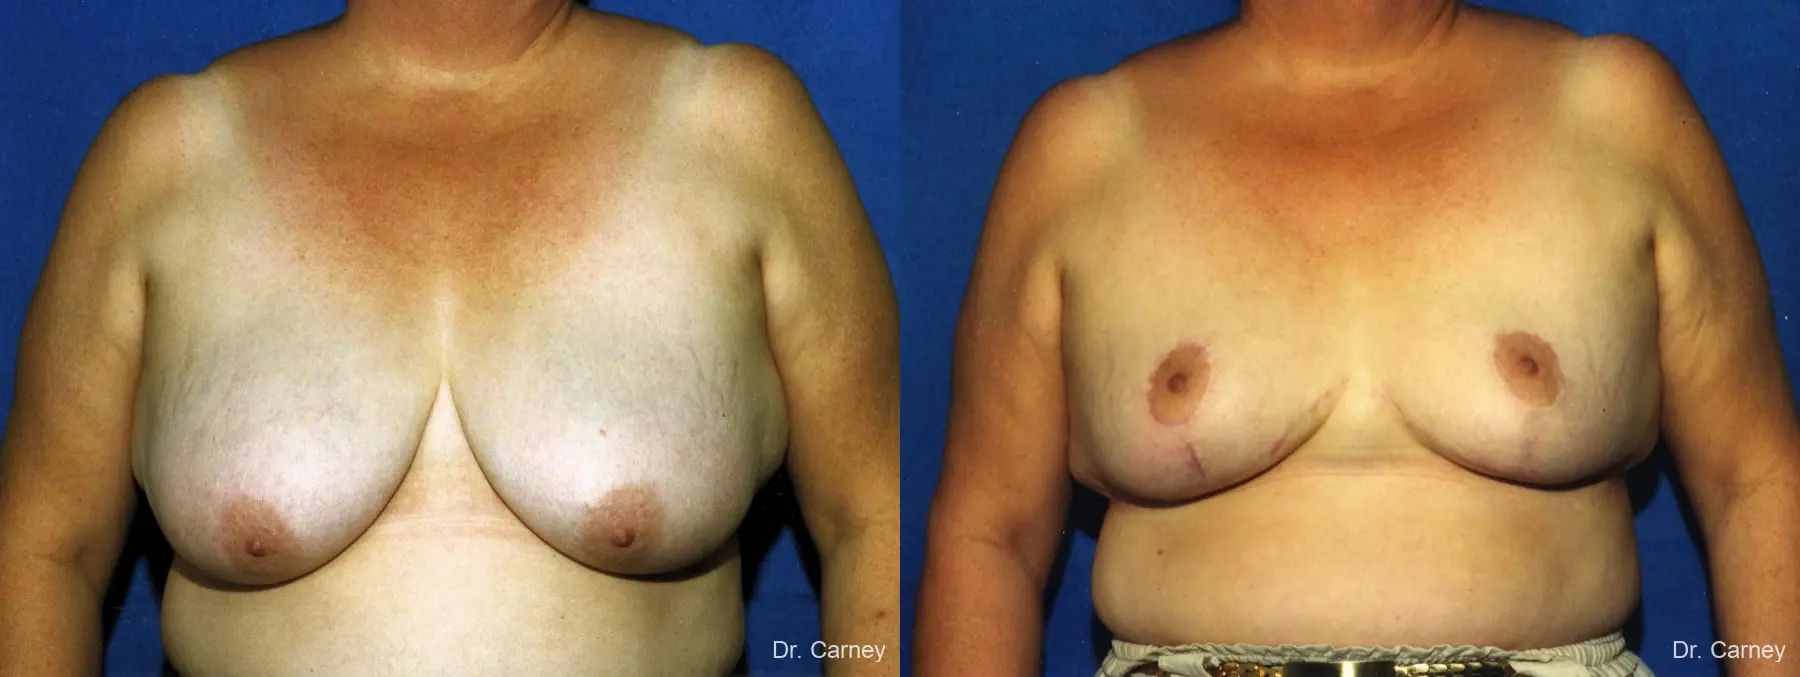 Virginia Beach Breast Reduction 1234 - Before and After 1